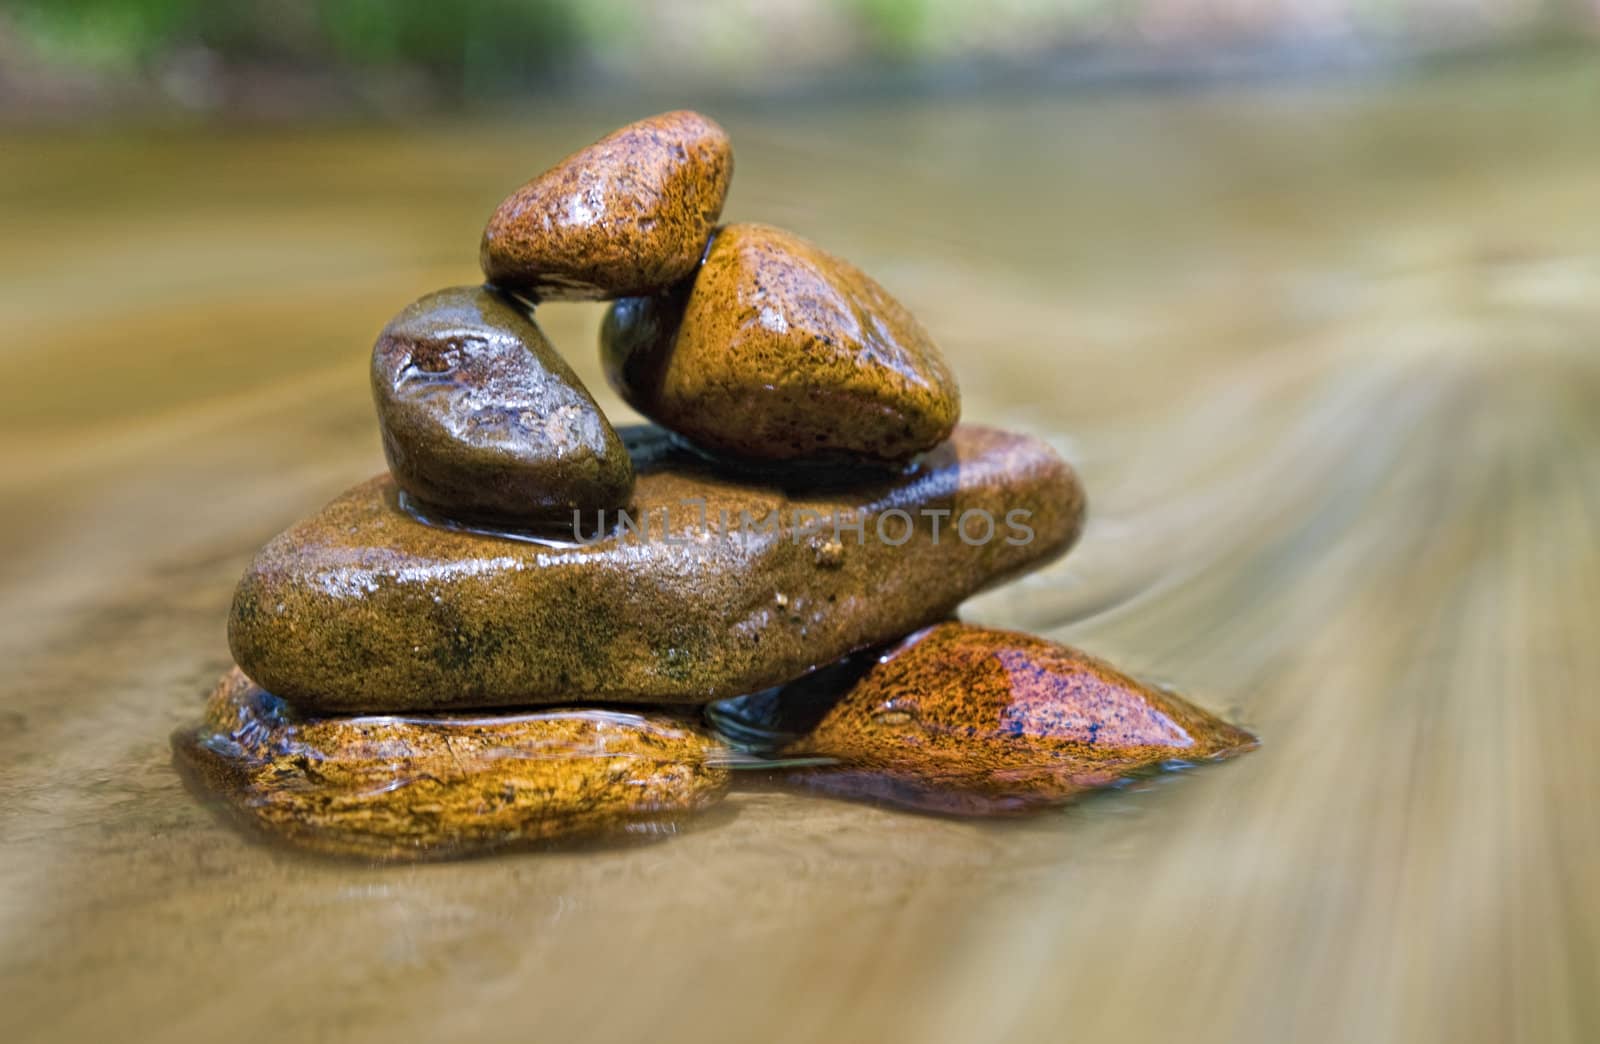 great image of a stack of rocks in a stream